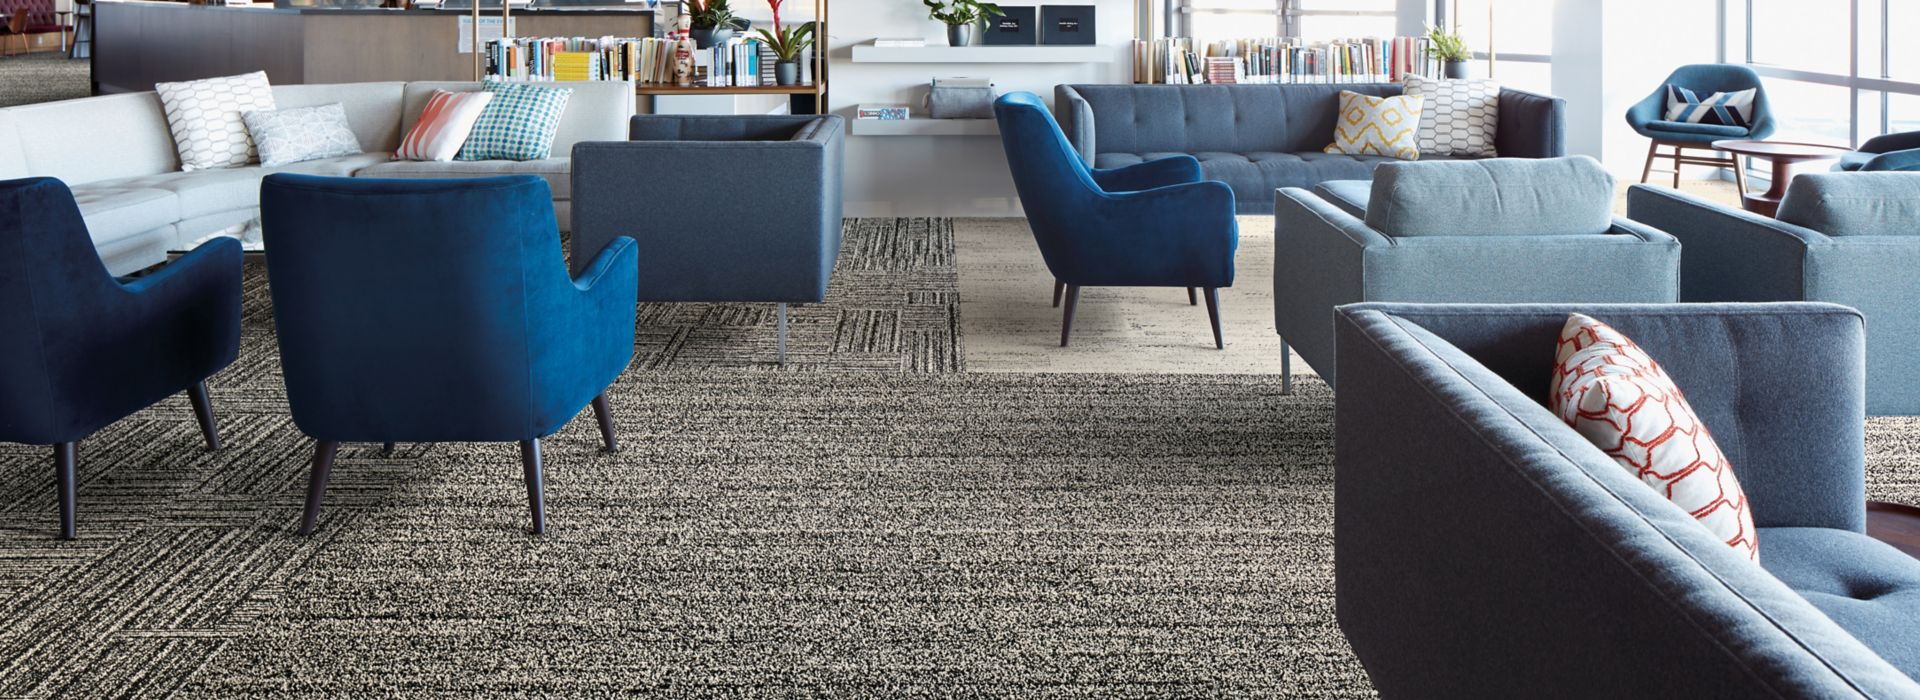 Interface Overedge plank carpet tile in open lounge area with chairs and couches imagen número 1